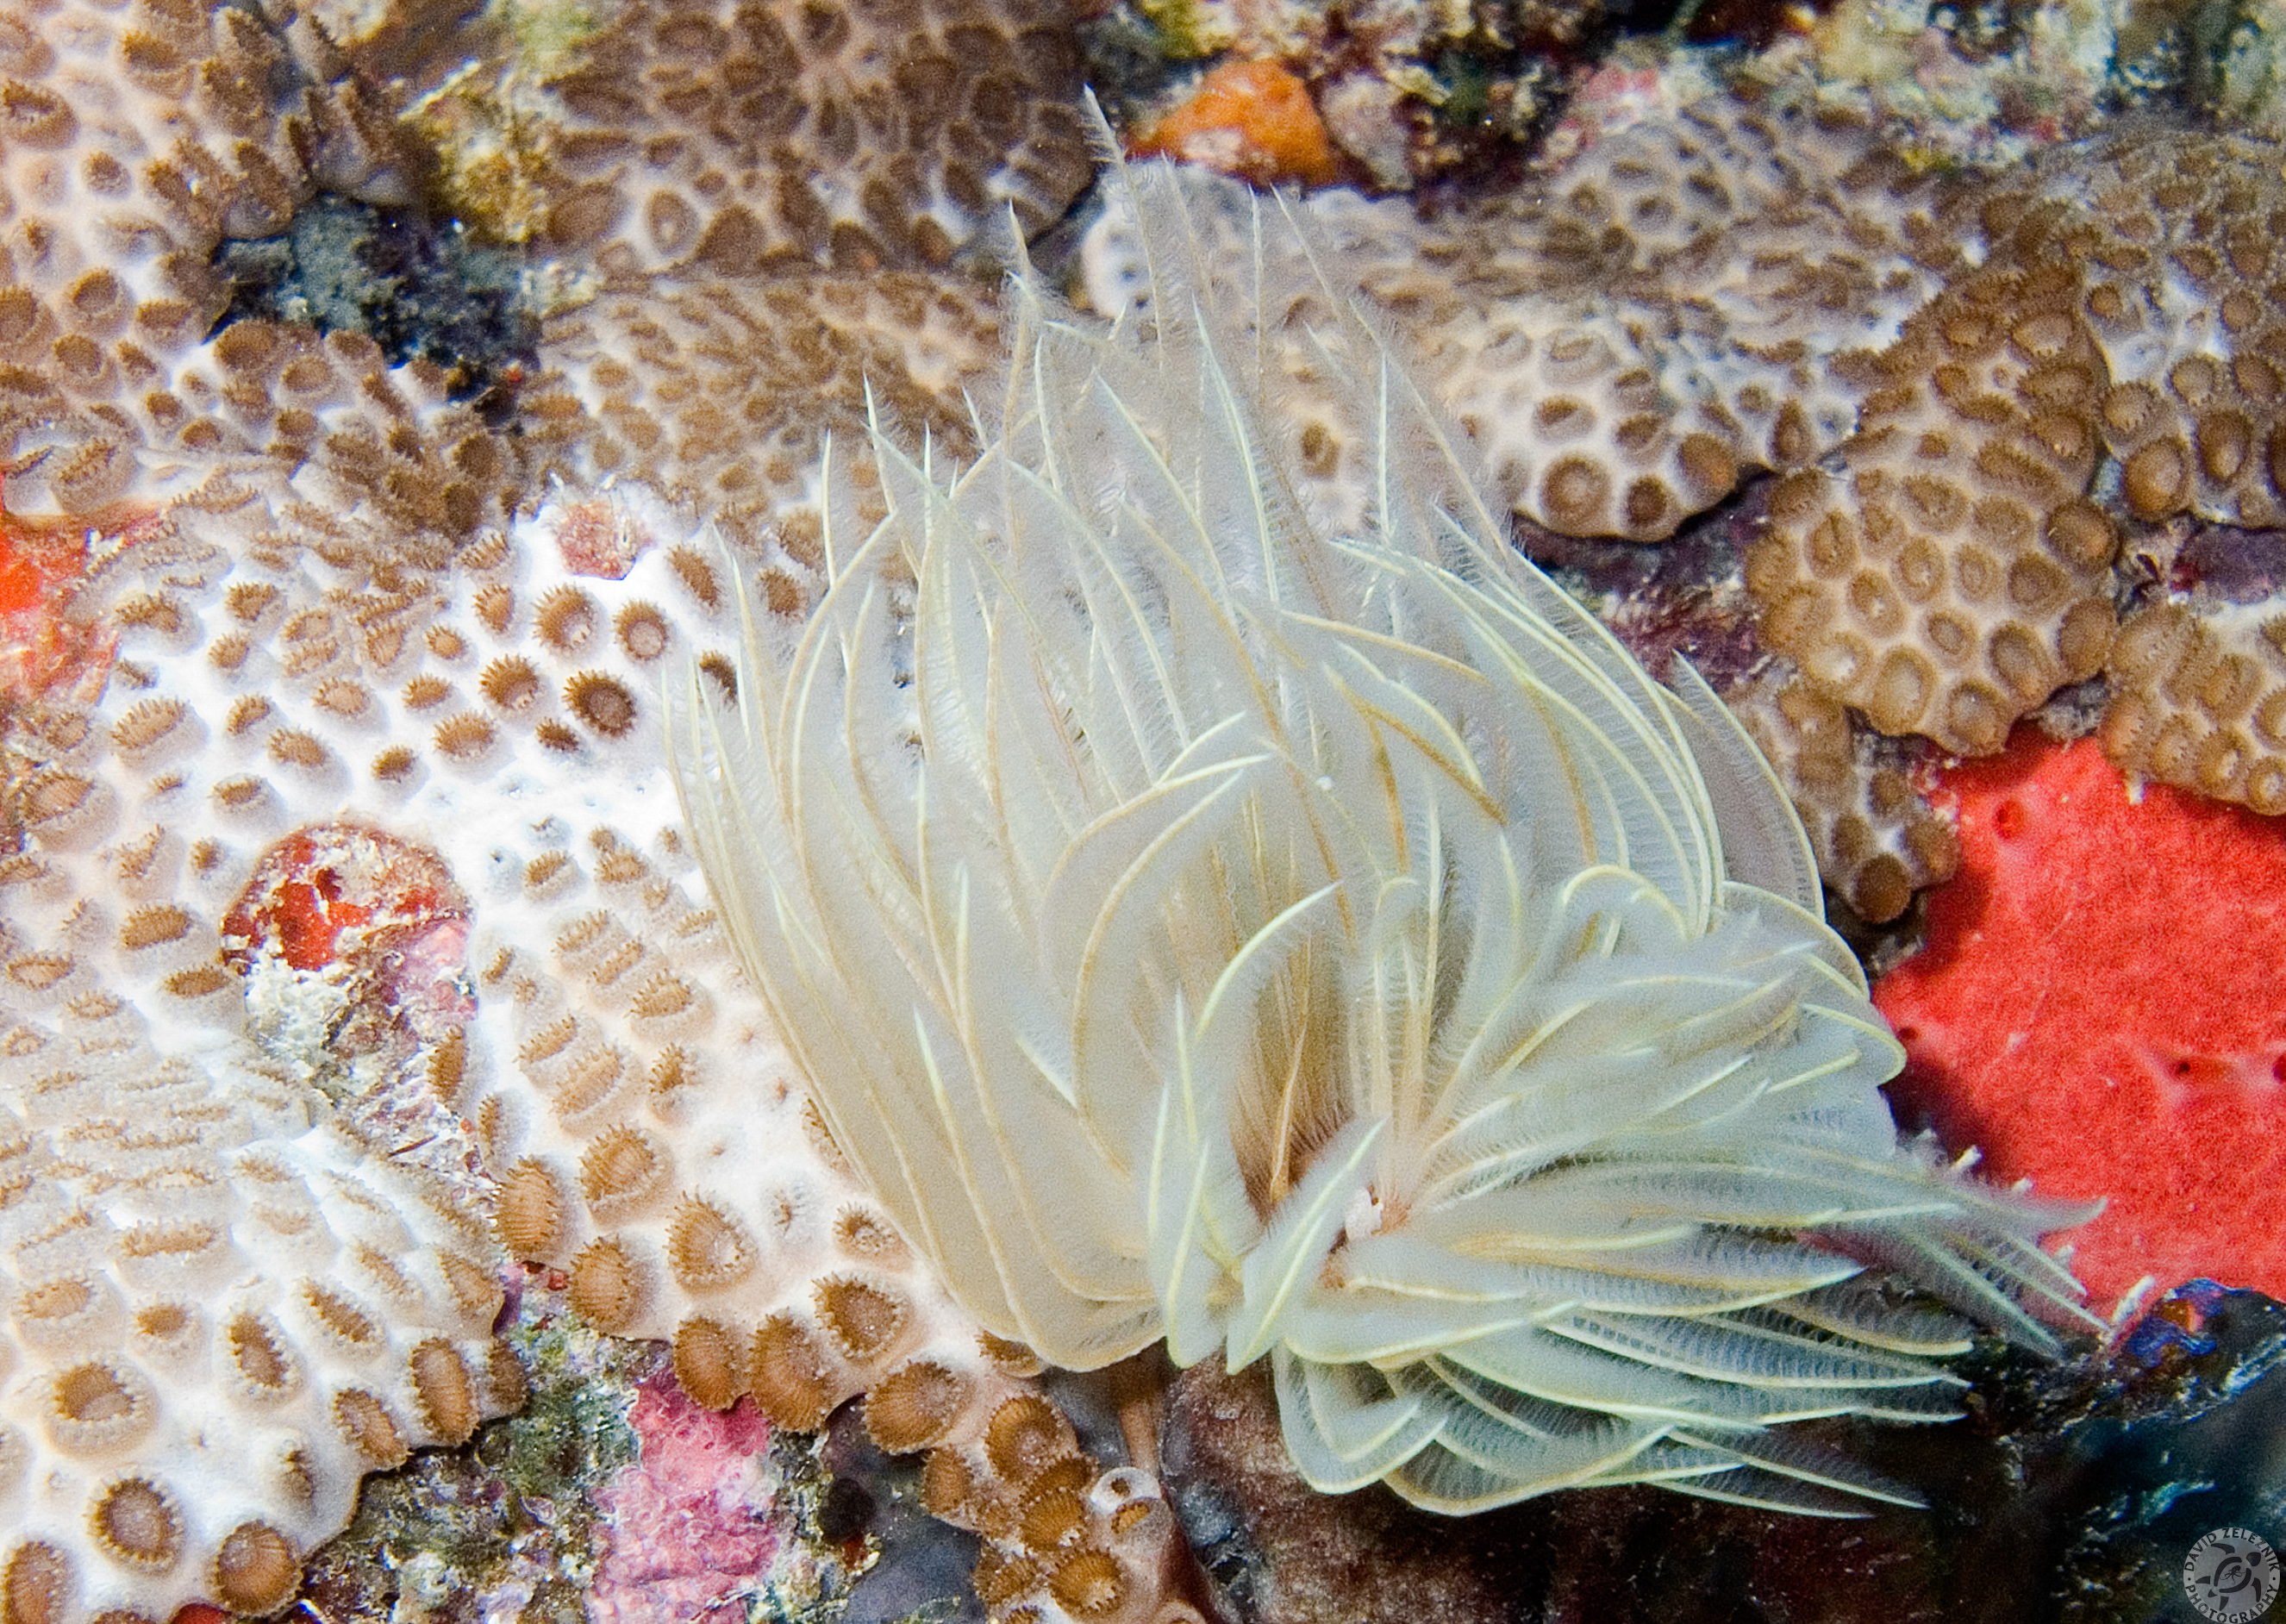 This is actually an animal, a Feather Duster Worm